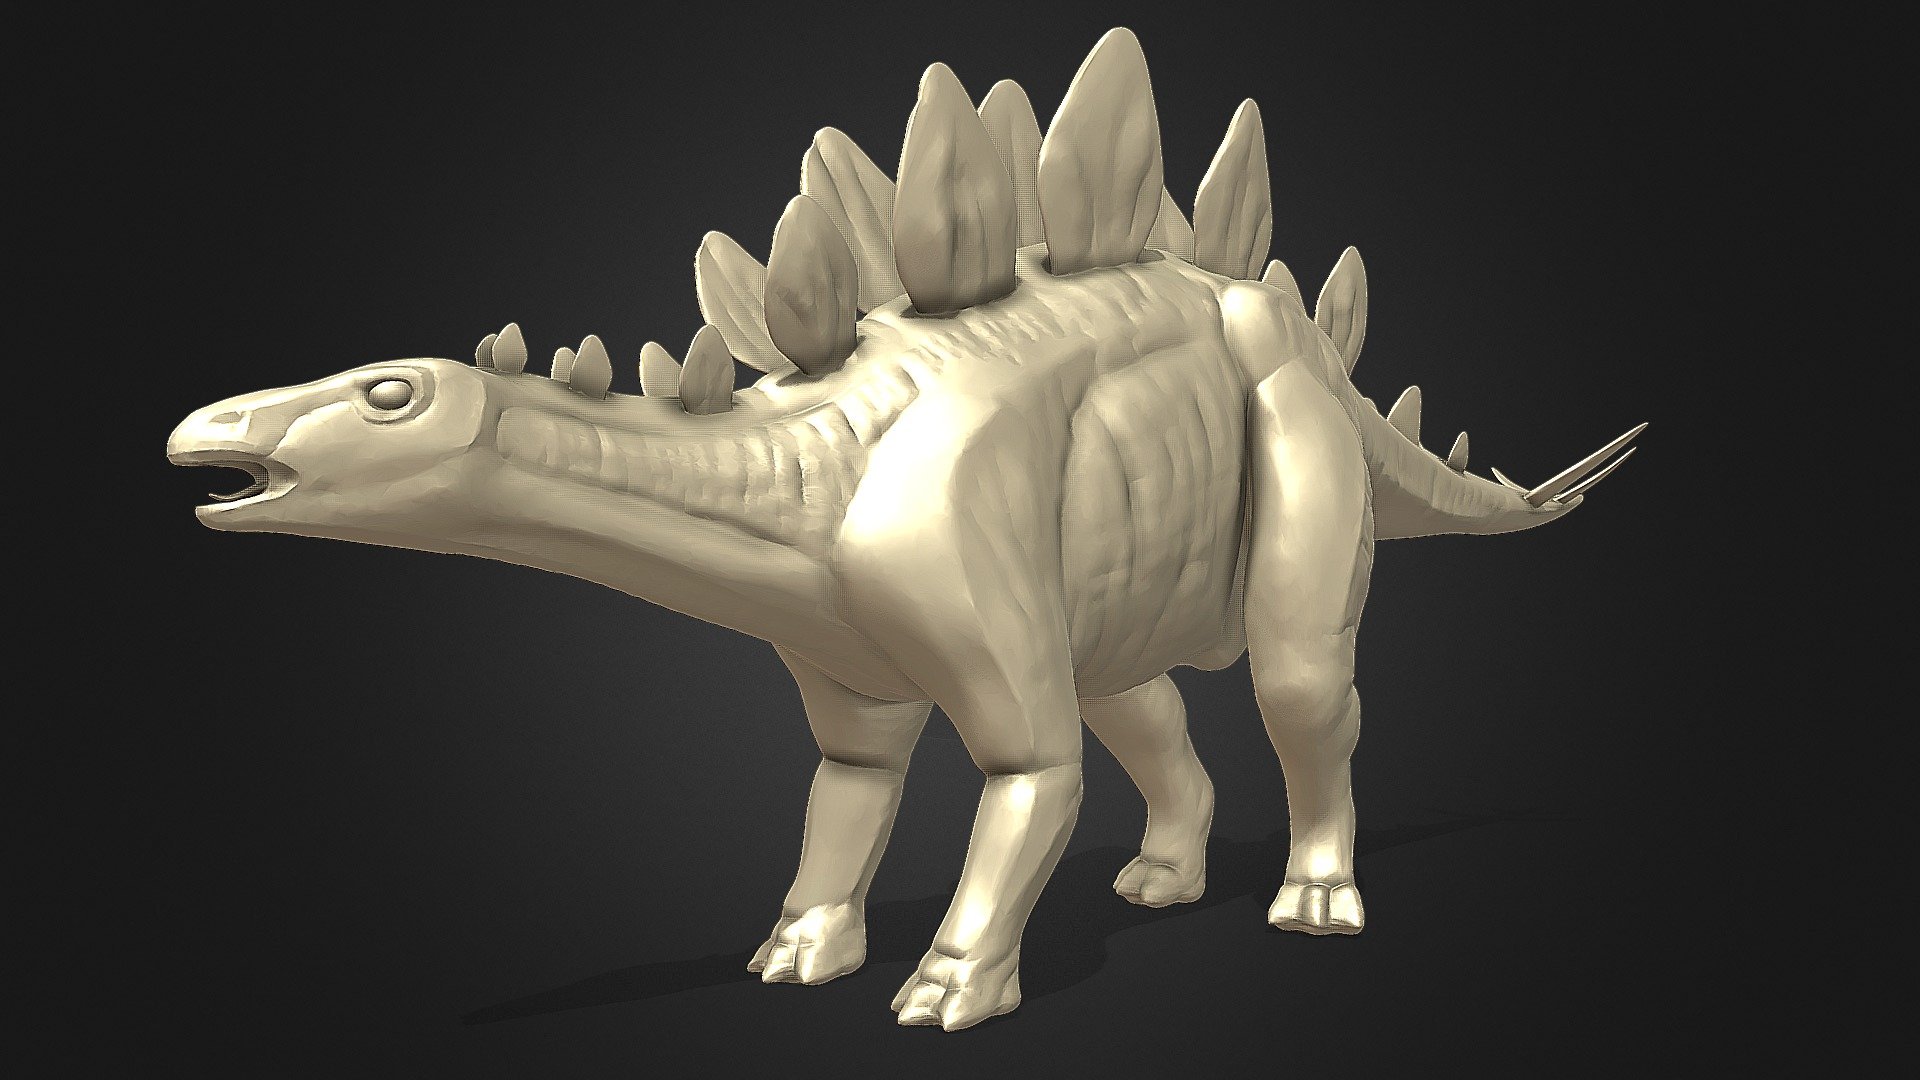 Realistic Animal with high resolution polygonal with gold material and Clear black background make it realistic and so cute.

Recomended For:


Basic modeling 
Rigging 
Sculpting 
Become Statue
Decorate
3D Print File
Toy
visualization

Have fun  :) - Gold Stegosarus - Buy Royalty Free 3D model by Puppy3D 3d model